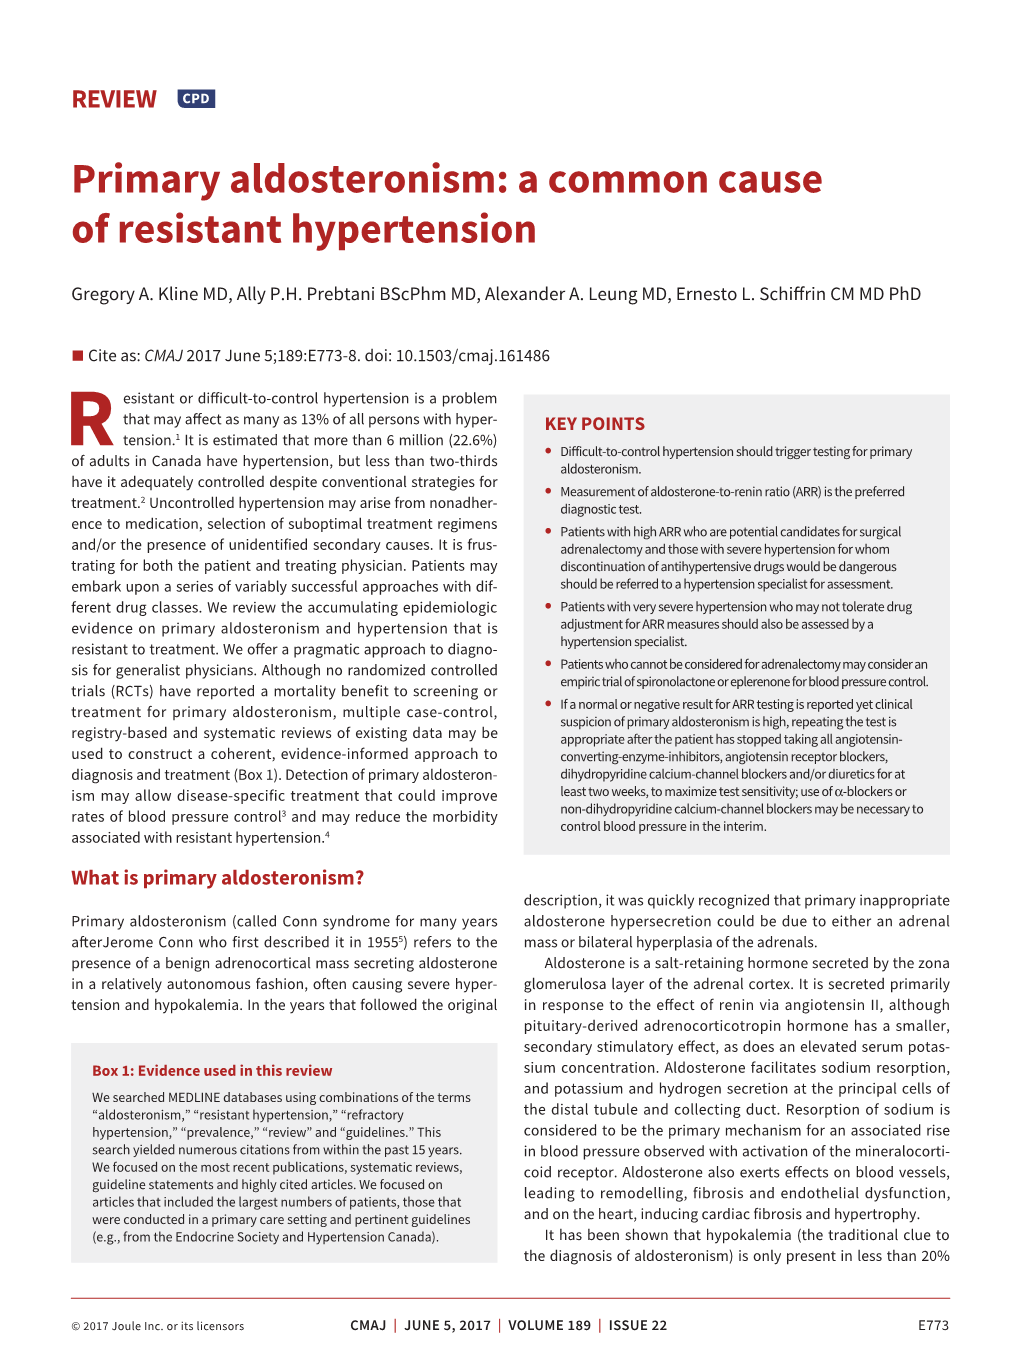 Primary Aldosteronism: a Common Cause of Resistant Hypertension